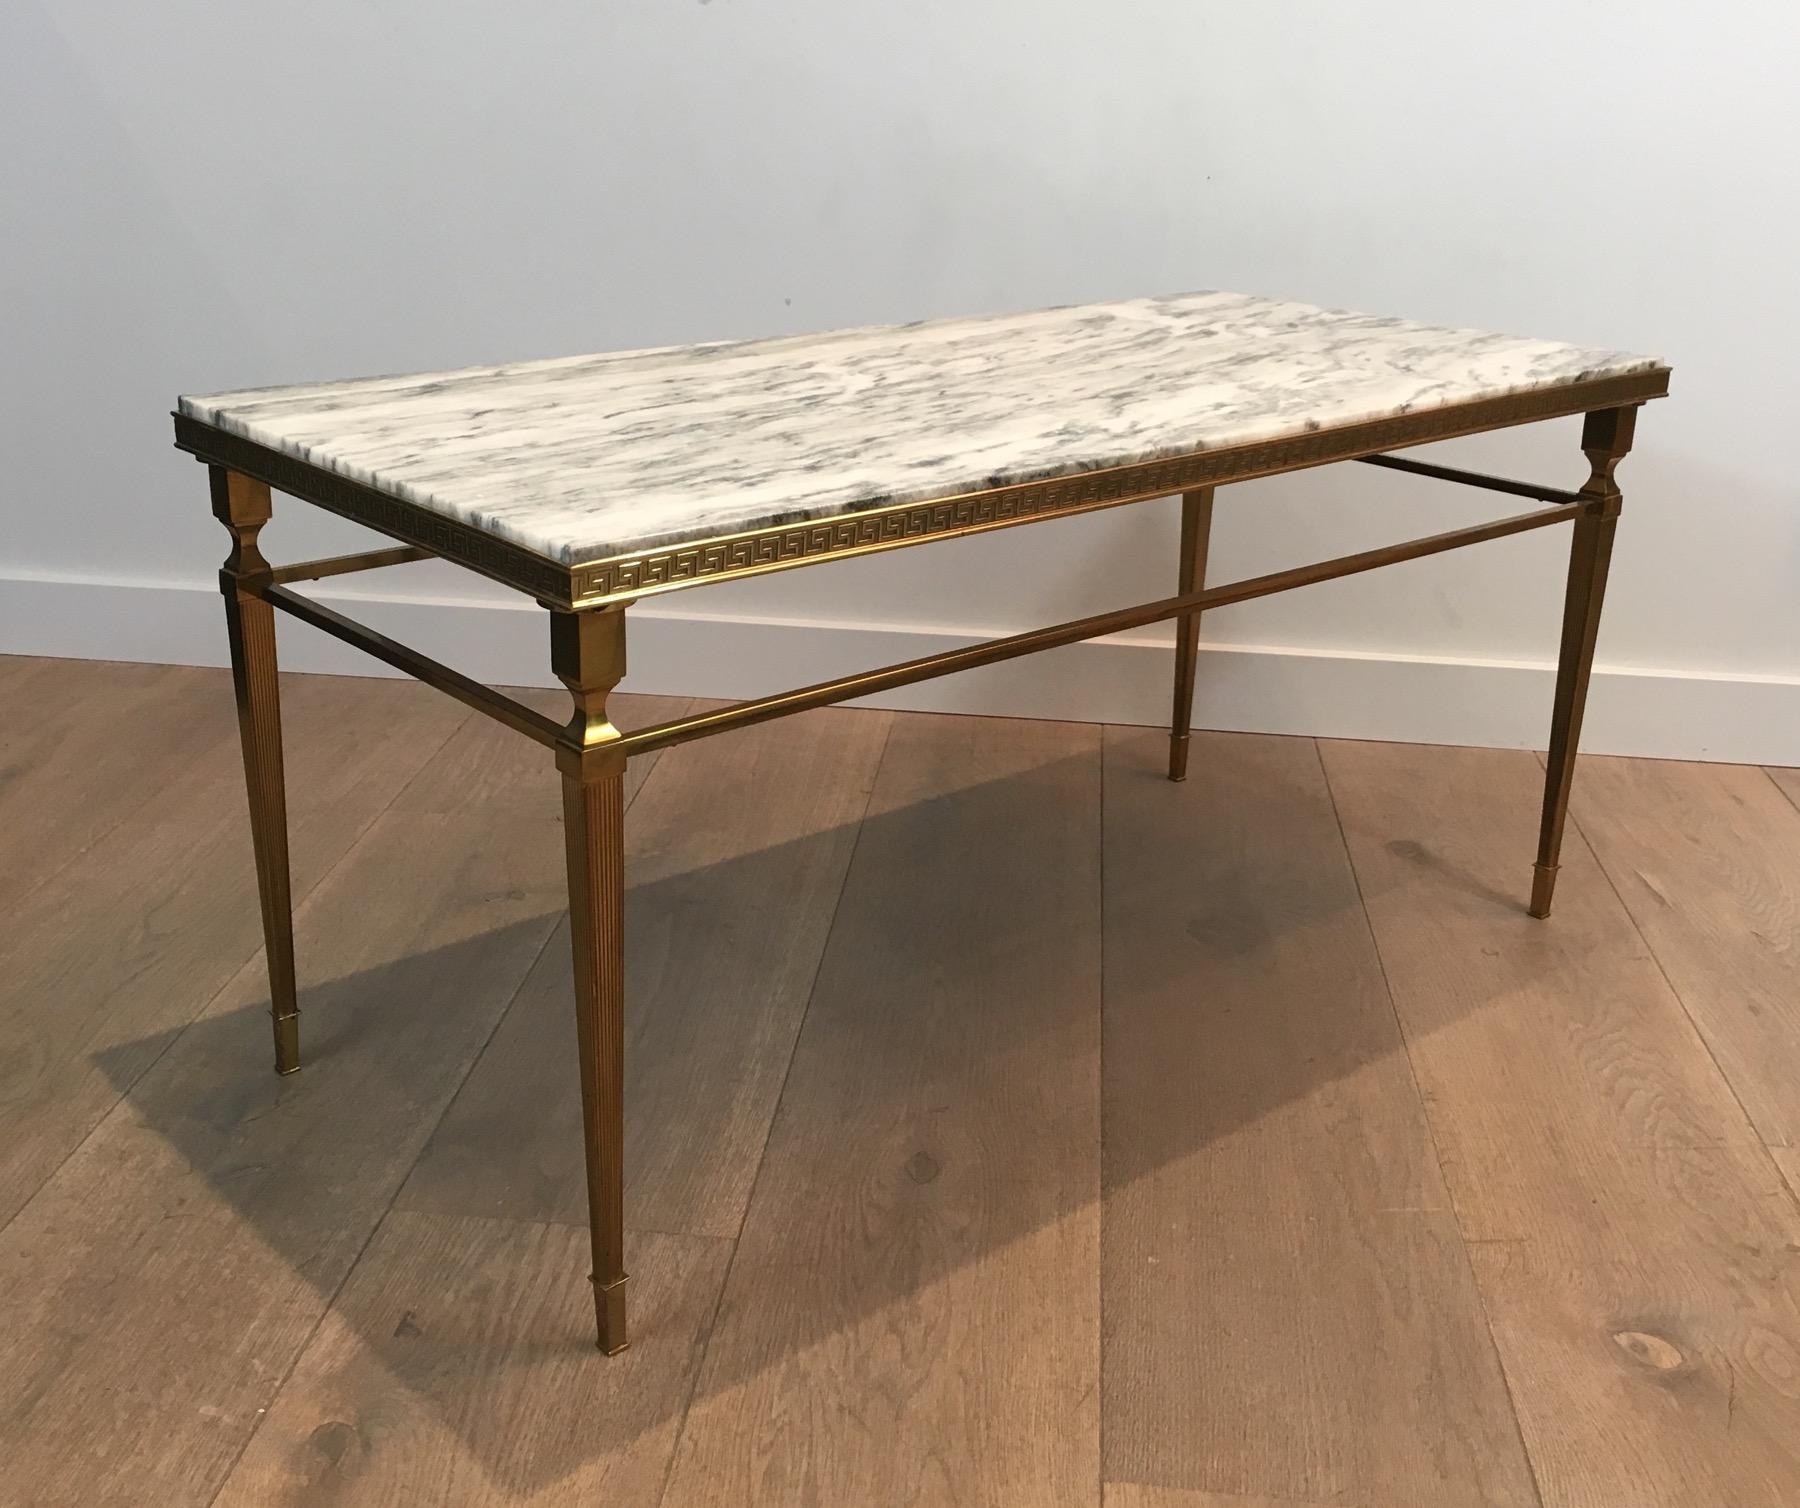 This neoclassical coffee table is made of brass with Greek keys decor and a white and grey marble top. This cocktail table is a French work, attributed to famous Maison Jansen, circa 1940.